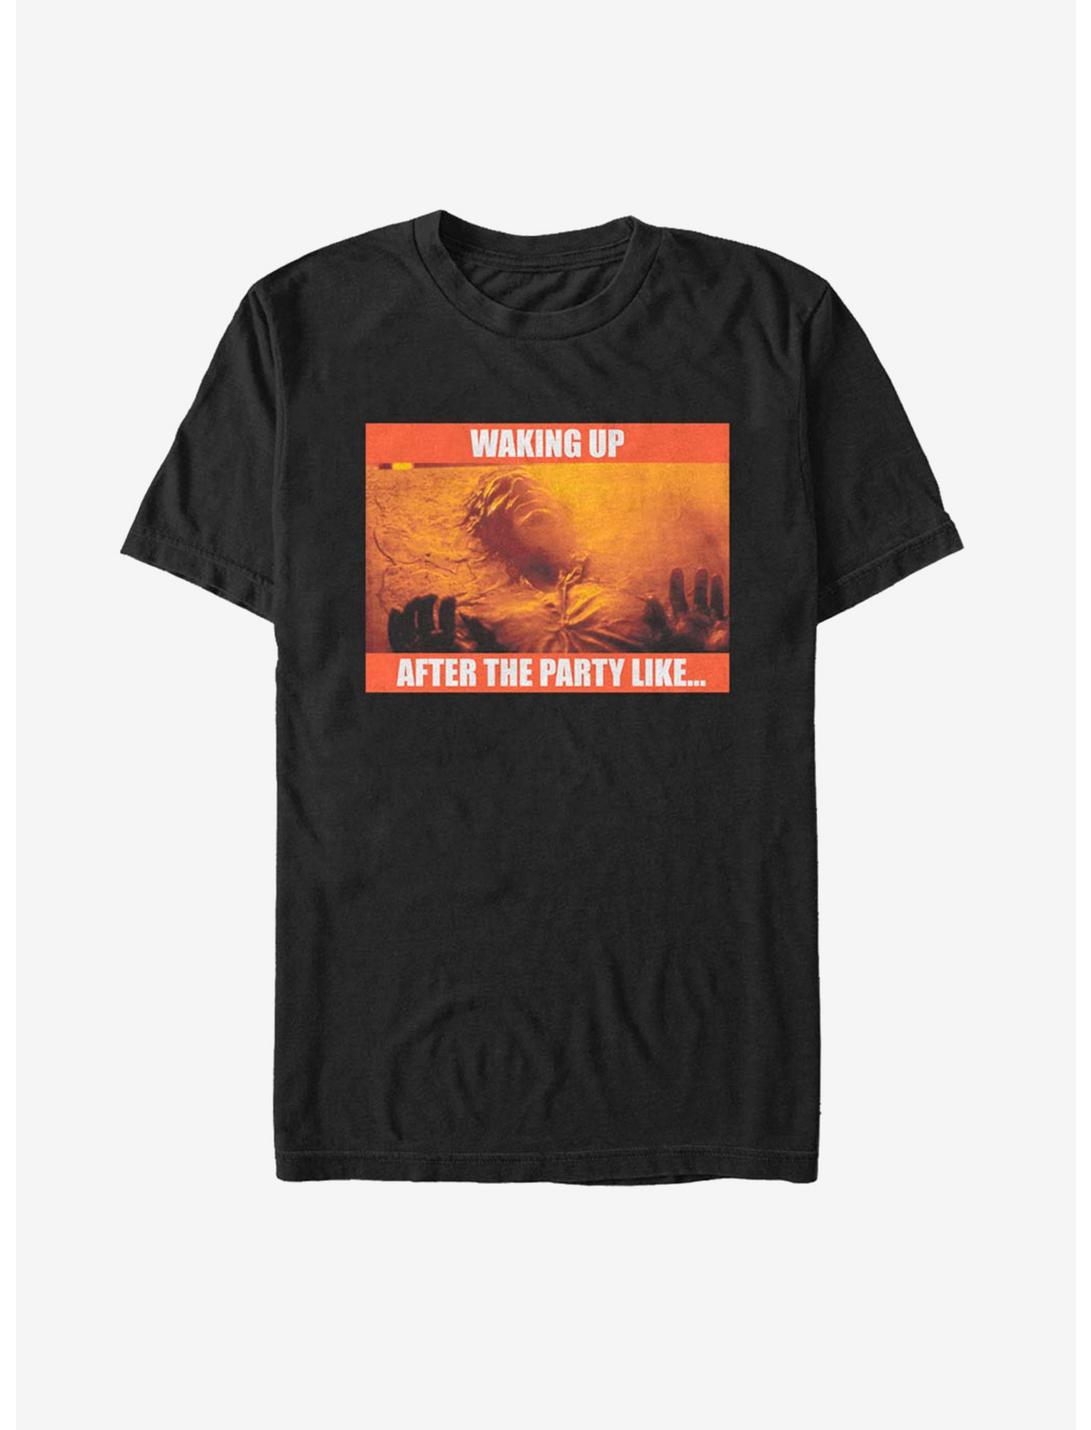 Star Wars Waking Up After The Party T-Shirt, BLACK, hi-res